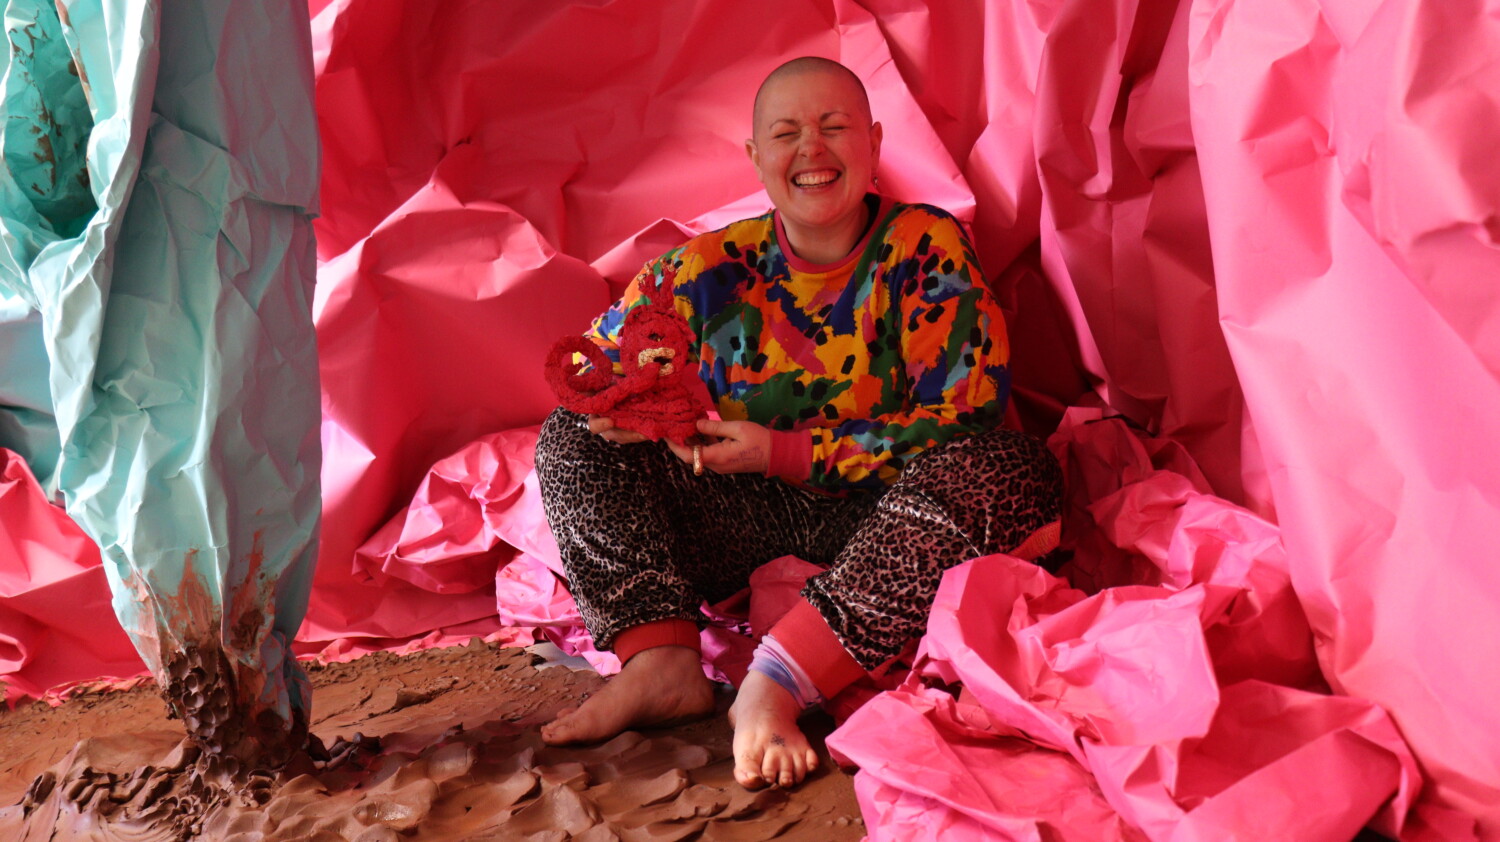 Colour photo, interior. Kitt, a white, shaven headed person with a wide crinkly nosed smile, sits amongst vast sheets of pink and mint green paper crumple to form a cave - like structure around them. on the floor is wet, raw terracotta clay in rolling folds. Credit: Art Matters Now